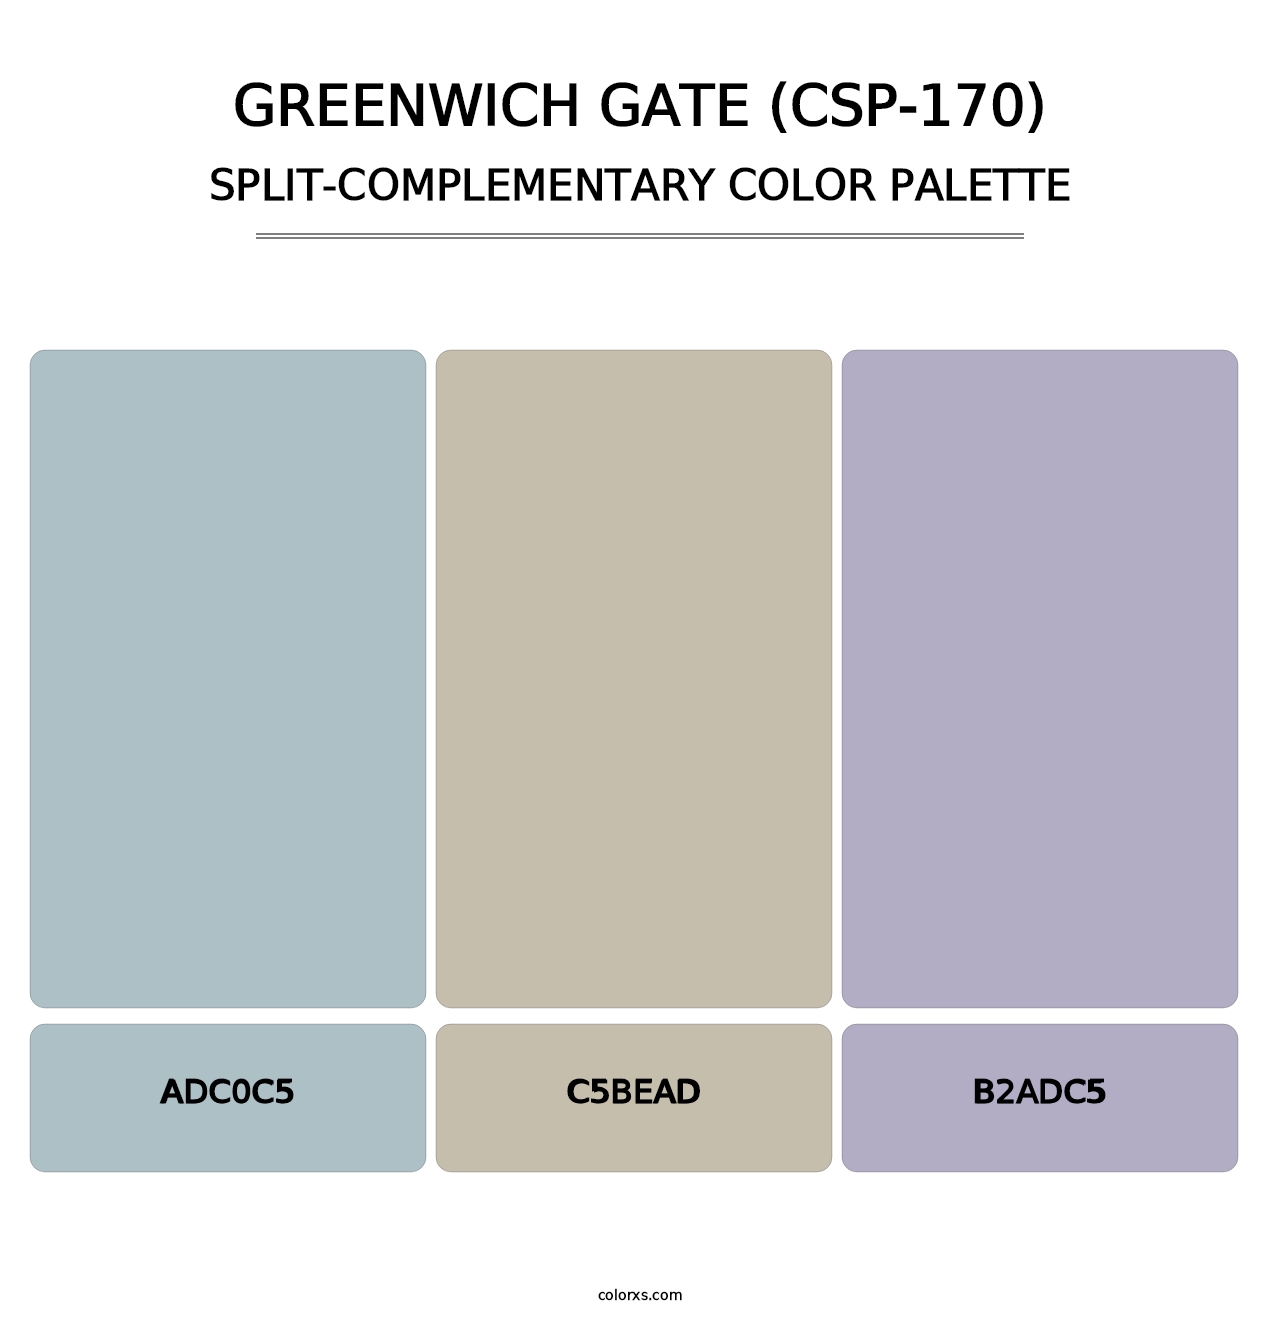 Greenwich Gate (CSP-170) - Split-Complementary Color Palette